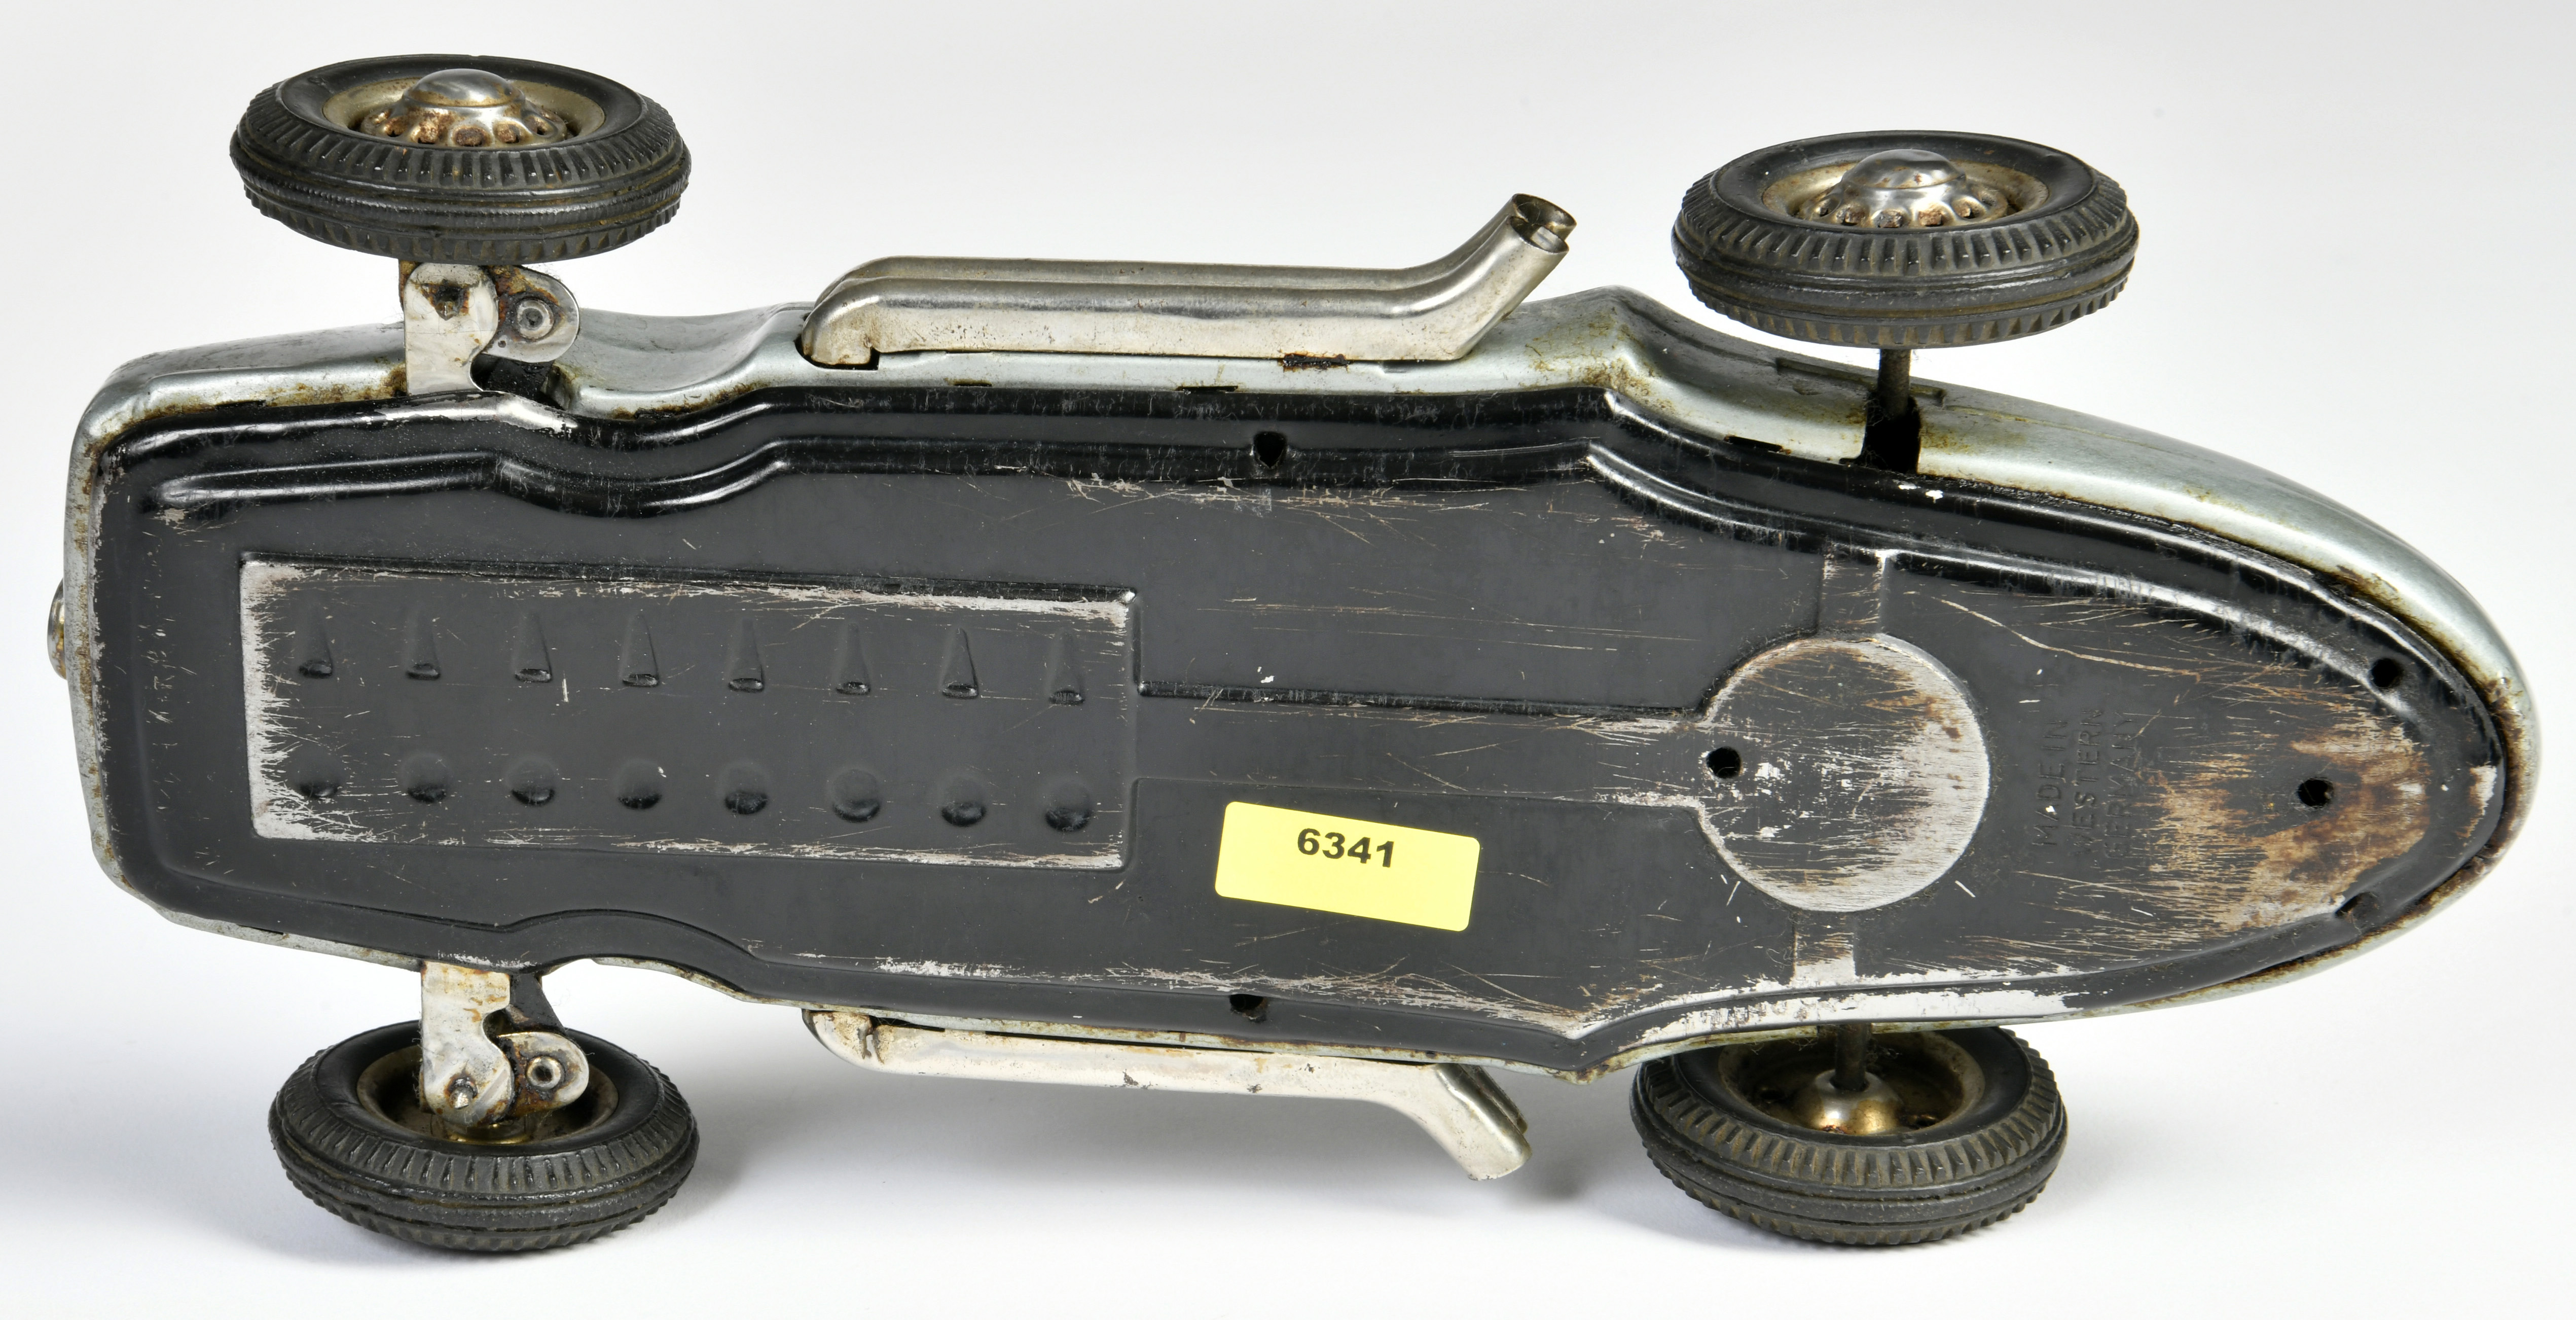 JNF, Mercedes racing car, W.-Germany, 25 cm, tin, friction defective, paint d., C 3 - Image 3 of 3